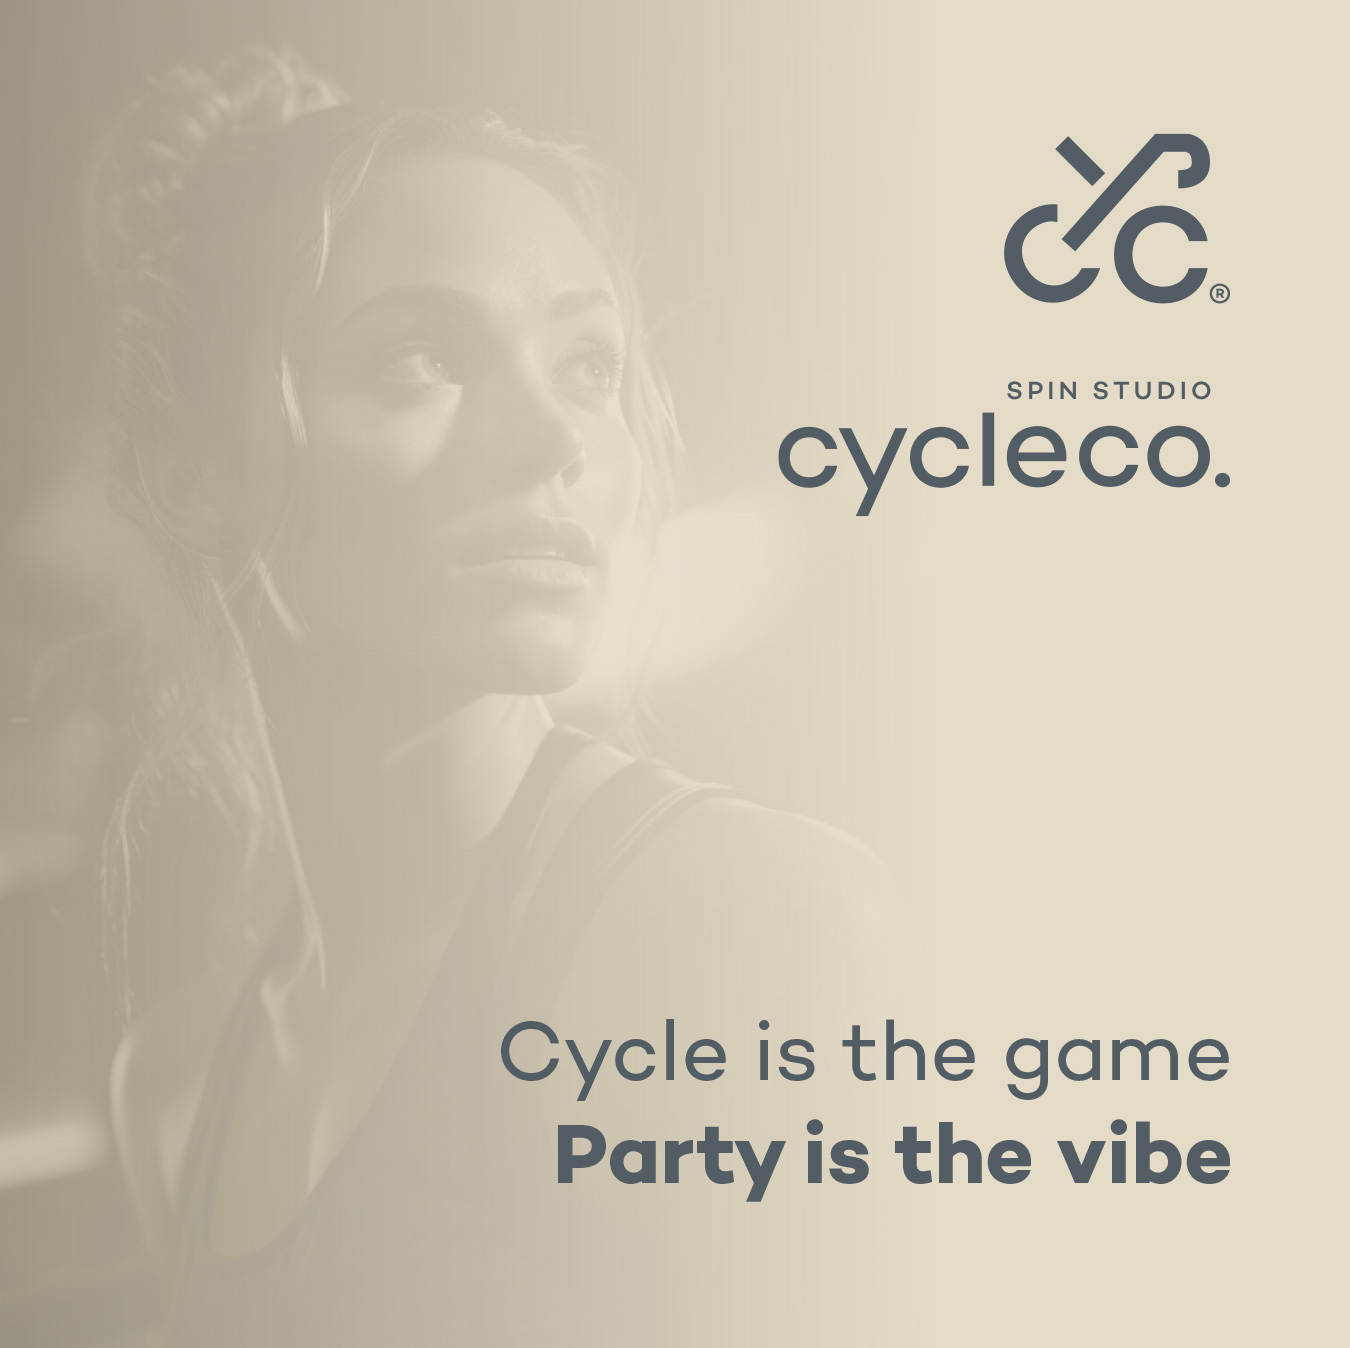 Cycle Co. Brand Development and Graphic Design by TL Design Co.